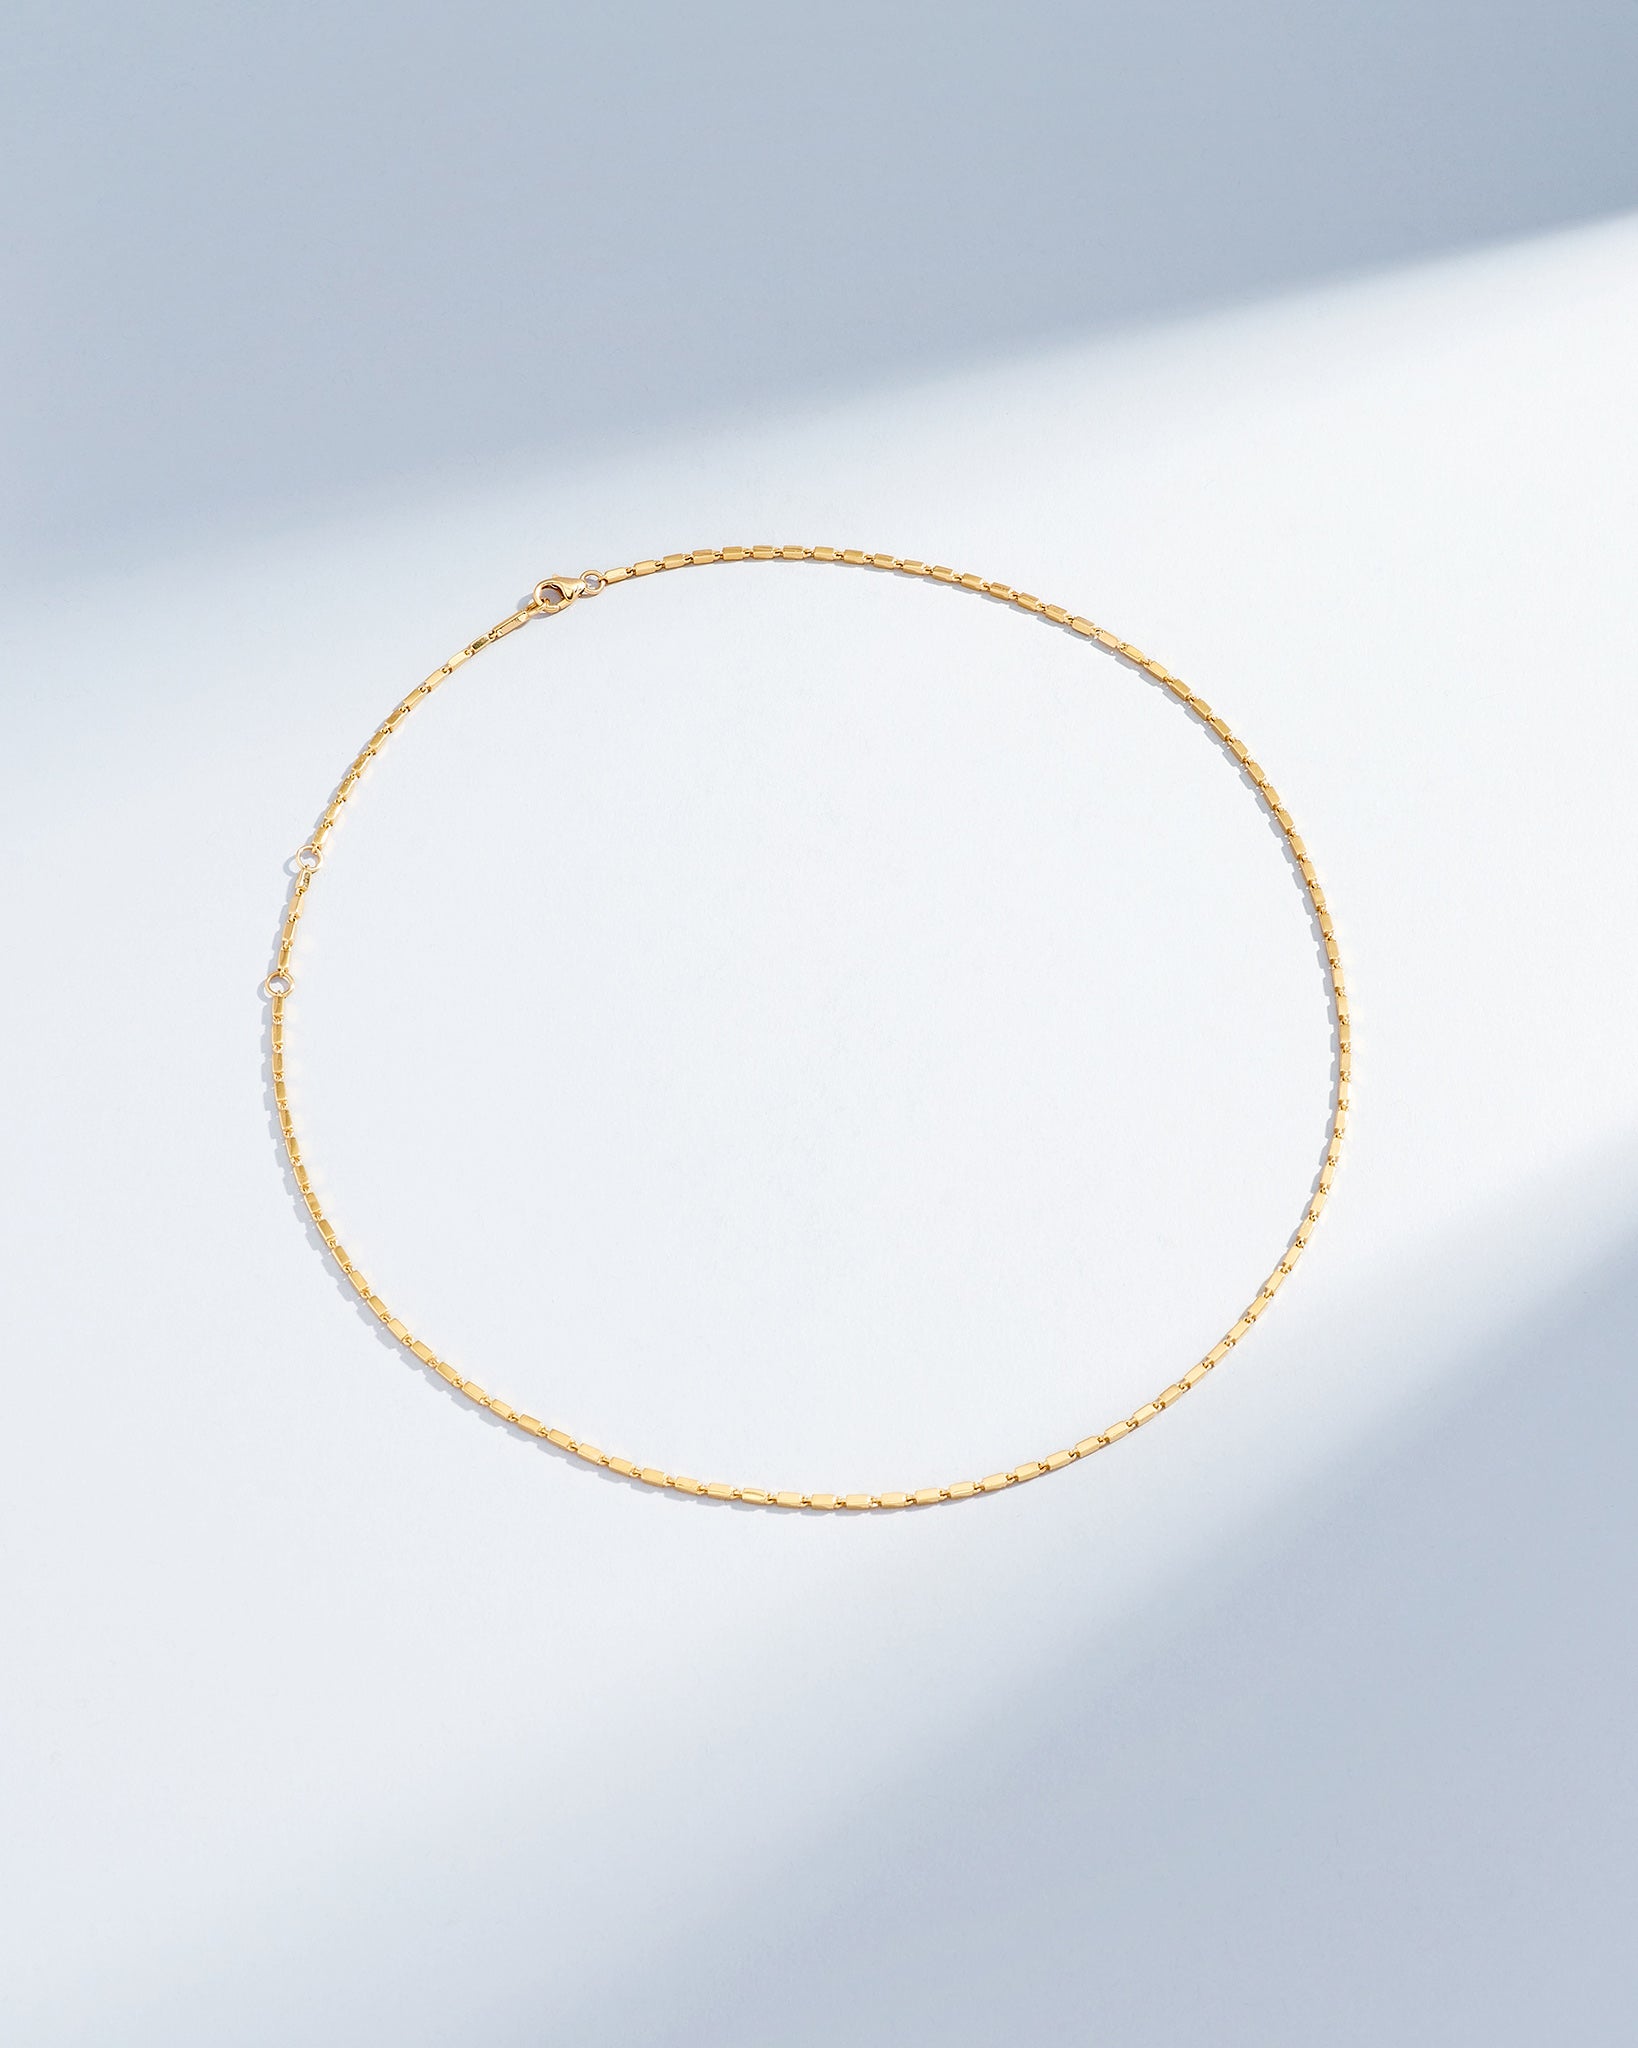 Suzanne Kalan Block-Chain Thin Necklace in 18k yellow gold